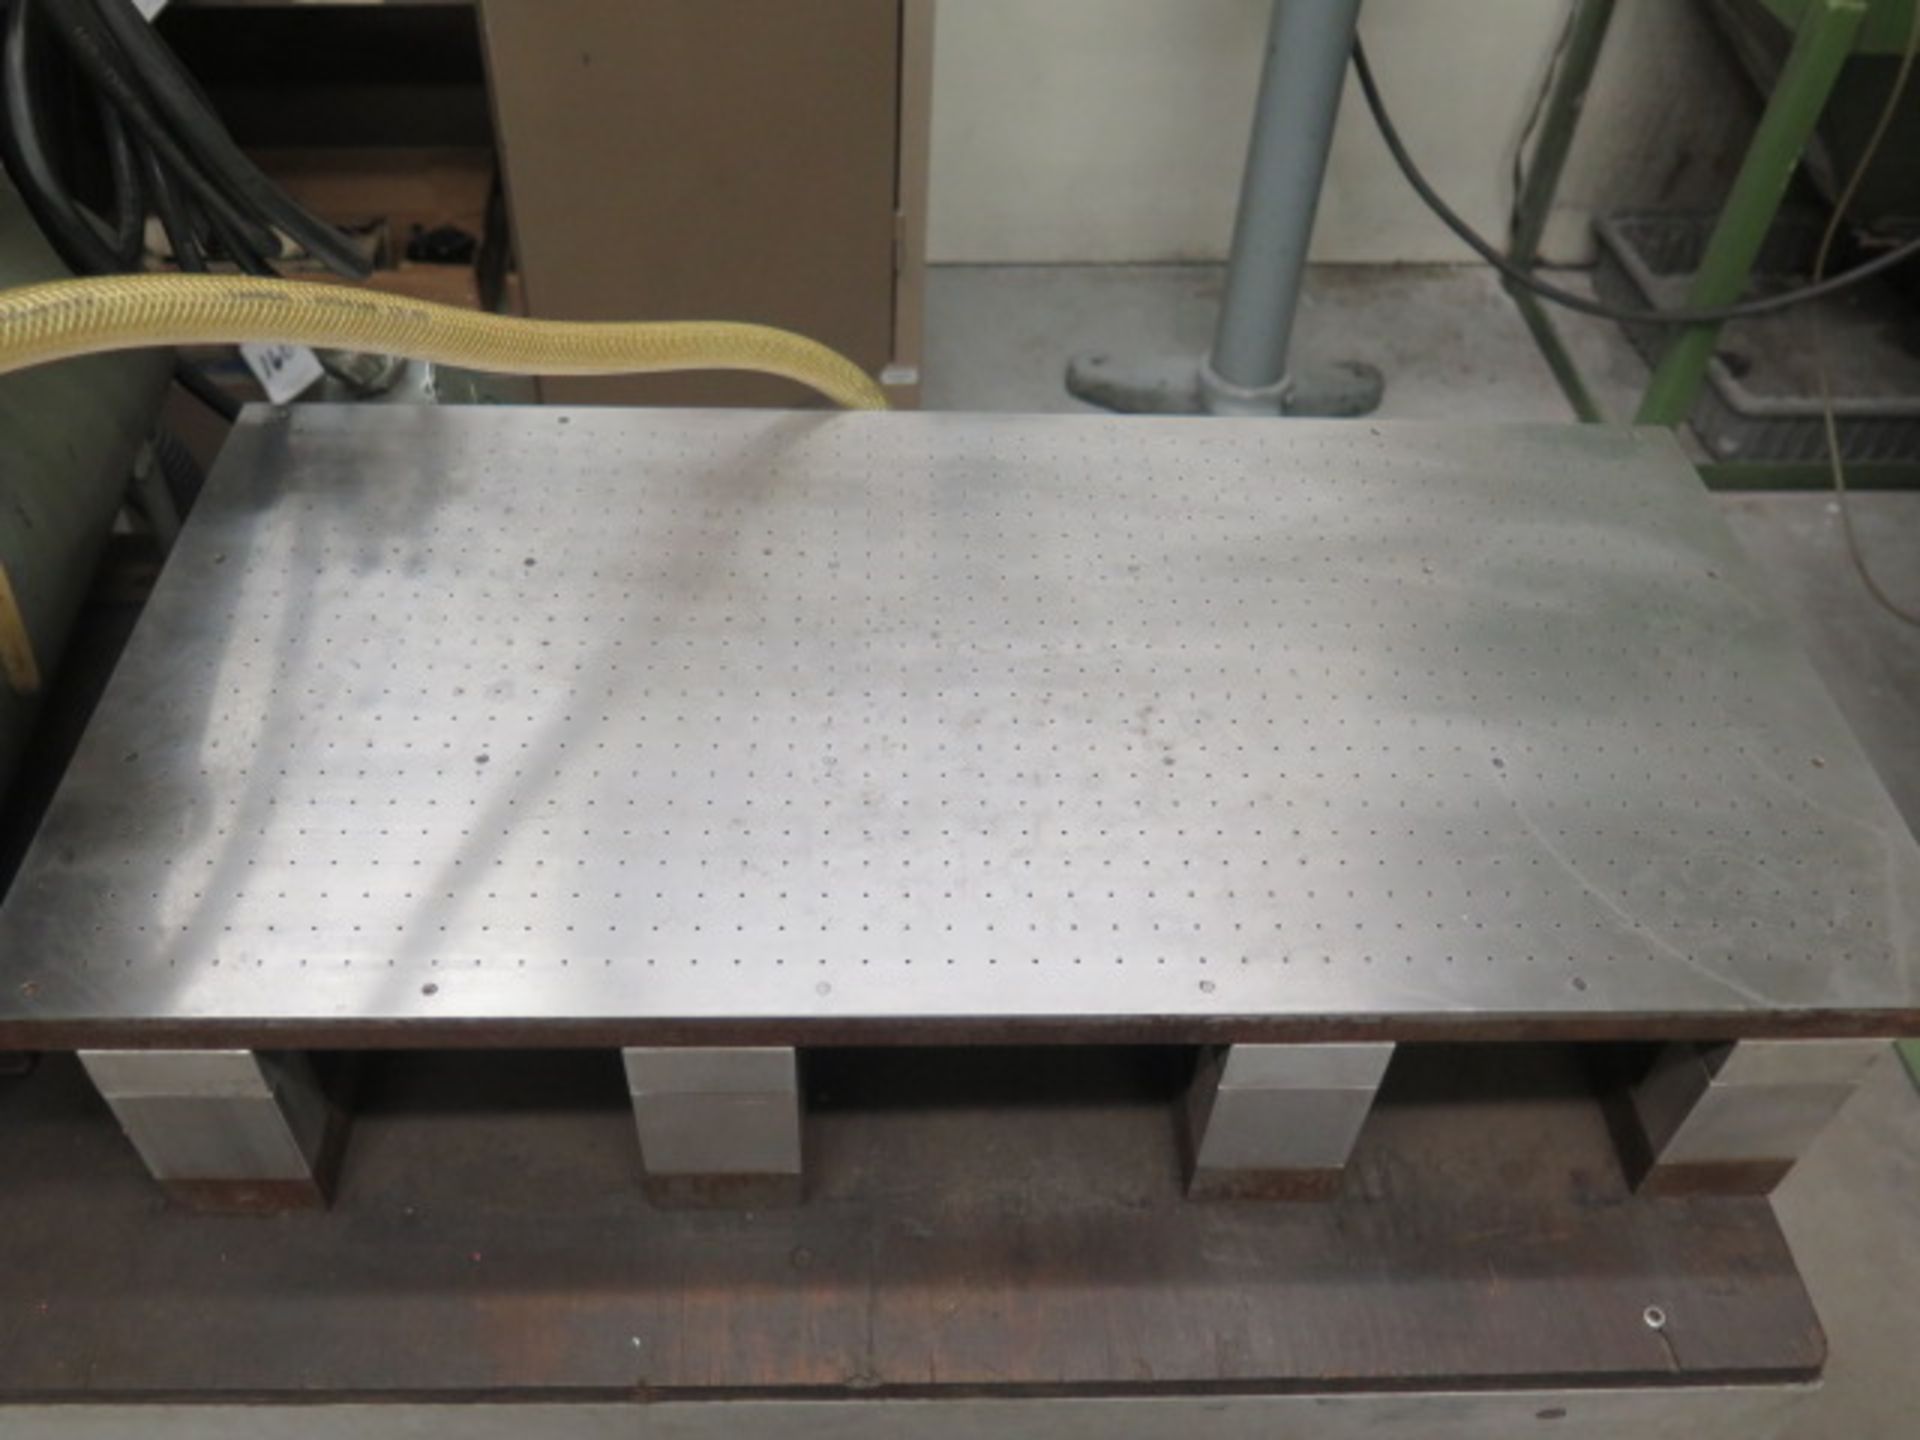 12" x 24" Vacuum Table and Gast Vacuum Pump (SOLD AS-IS - NO WARRANTY) - Image 3 of 7